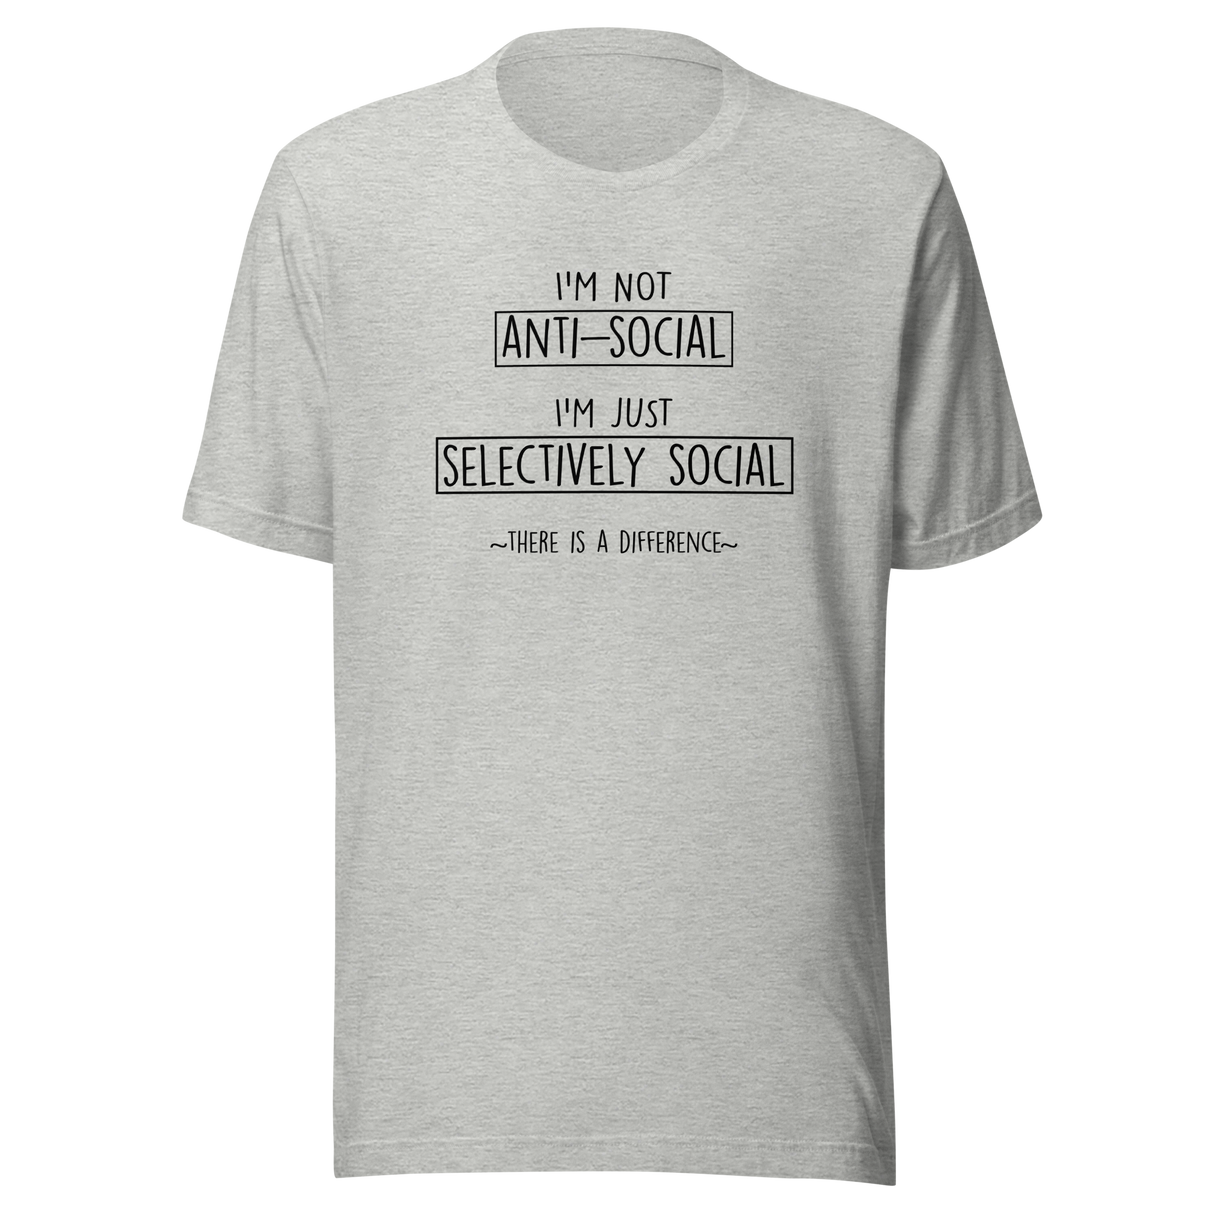 im-not-anti-social-i-am-selectively-social-there-is-a-difference-nerd-tee-anti-t-shirt-funny-tee-shy-t-shirt-humor-tee#color_athletic-heather